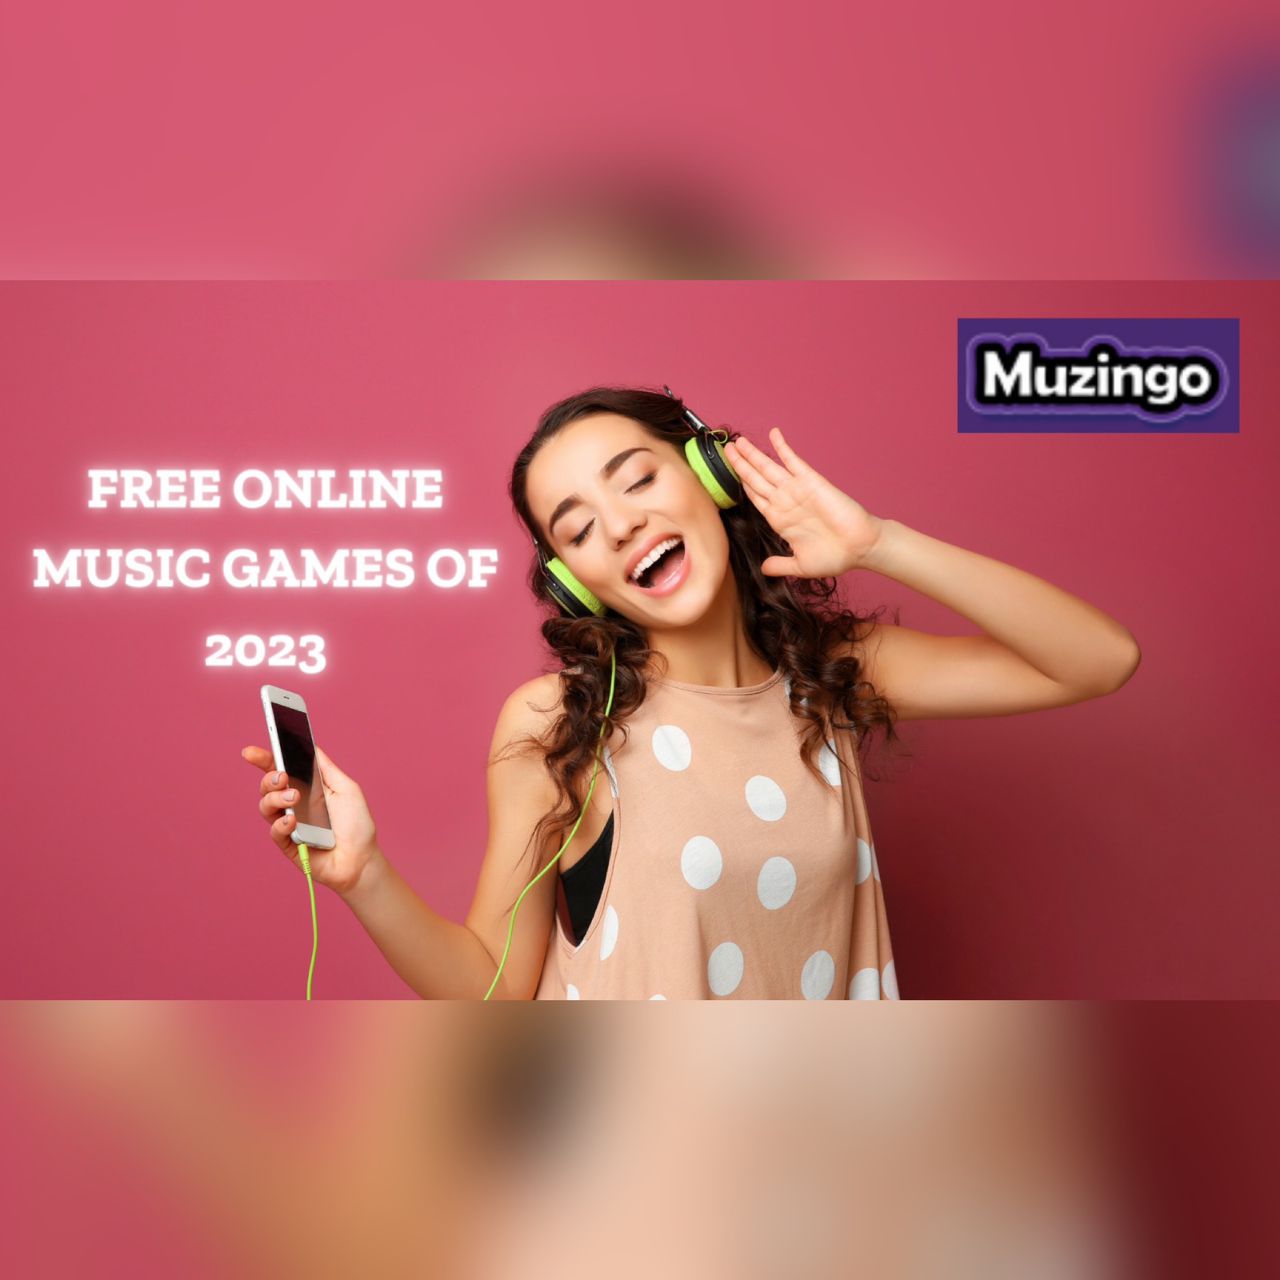 Free online music games of 2023